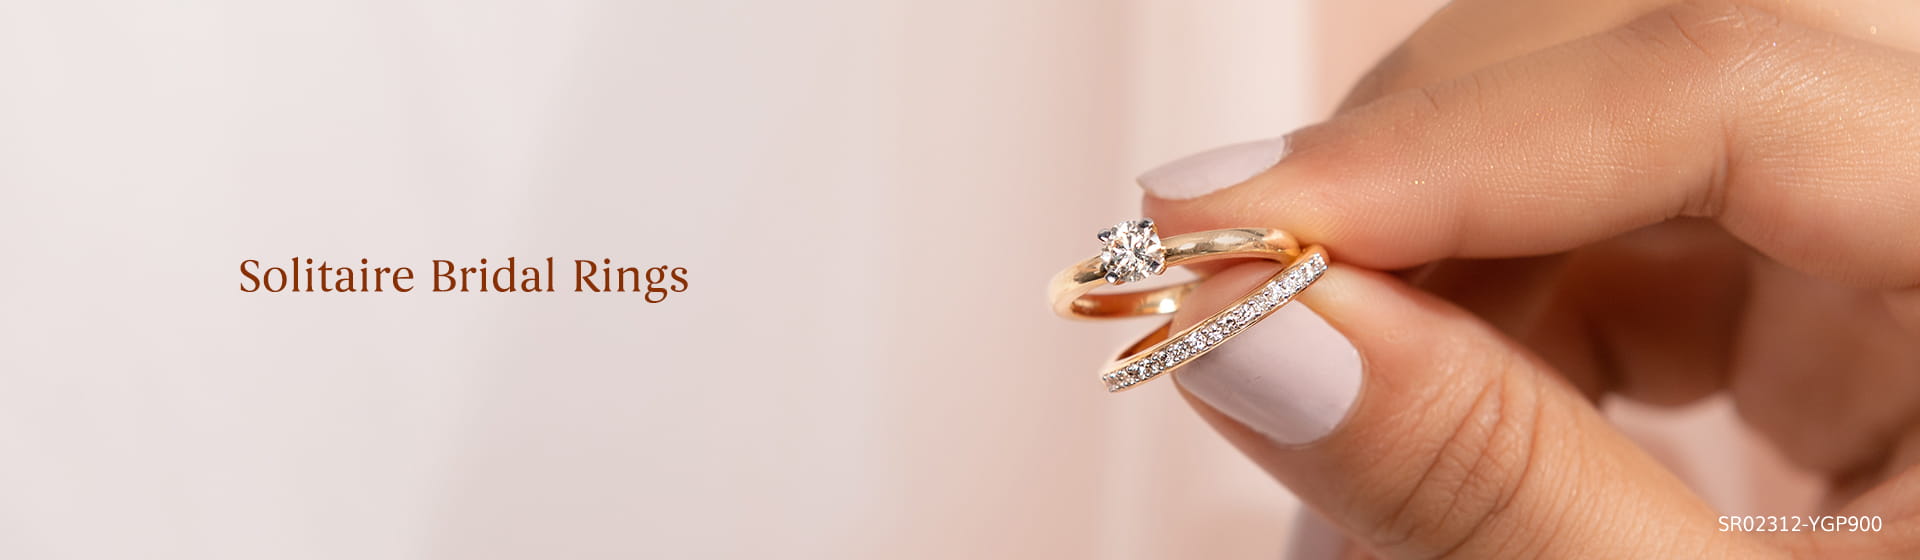 Buy Beautiful  Solitaire Bridal Rings At Best Prices